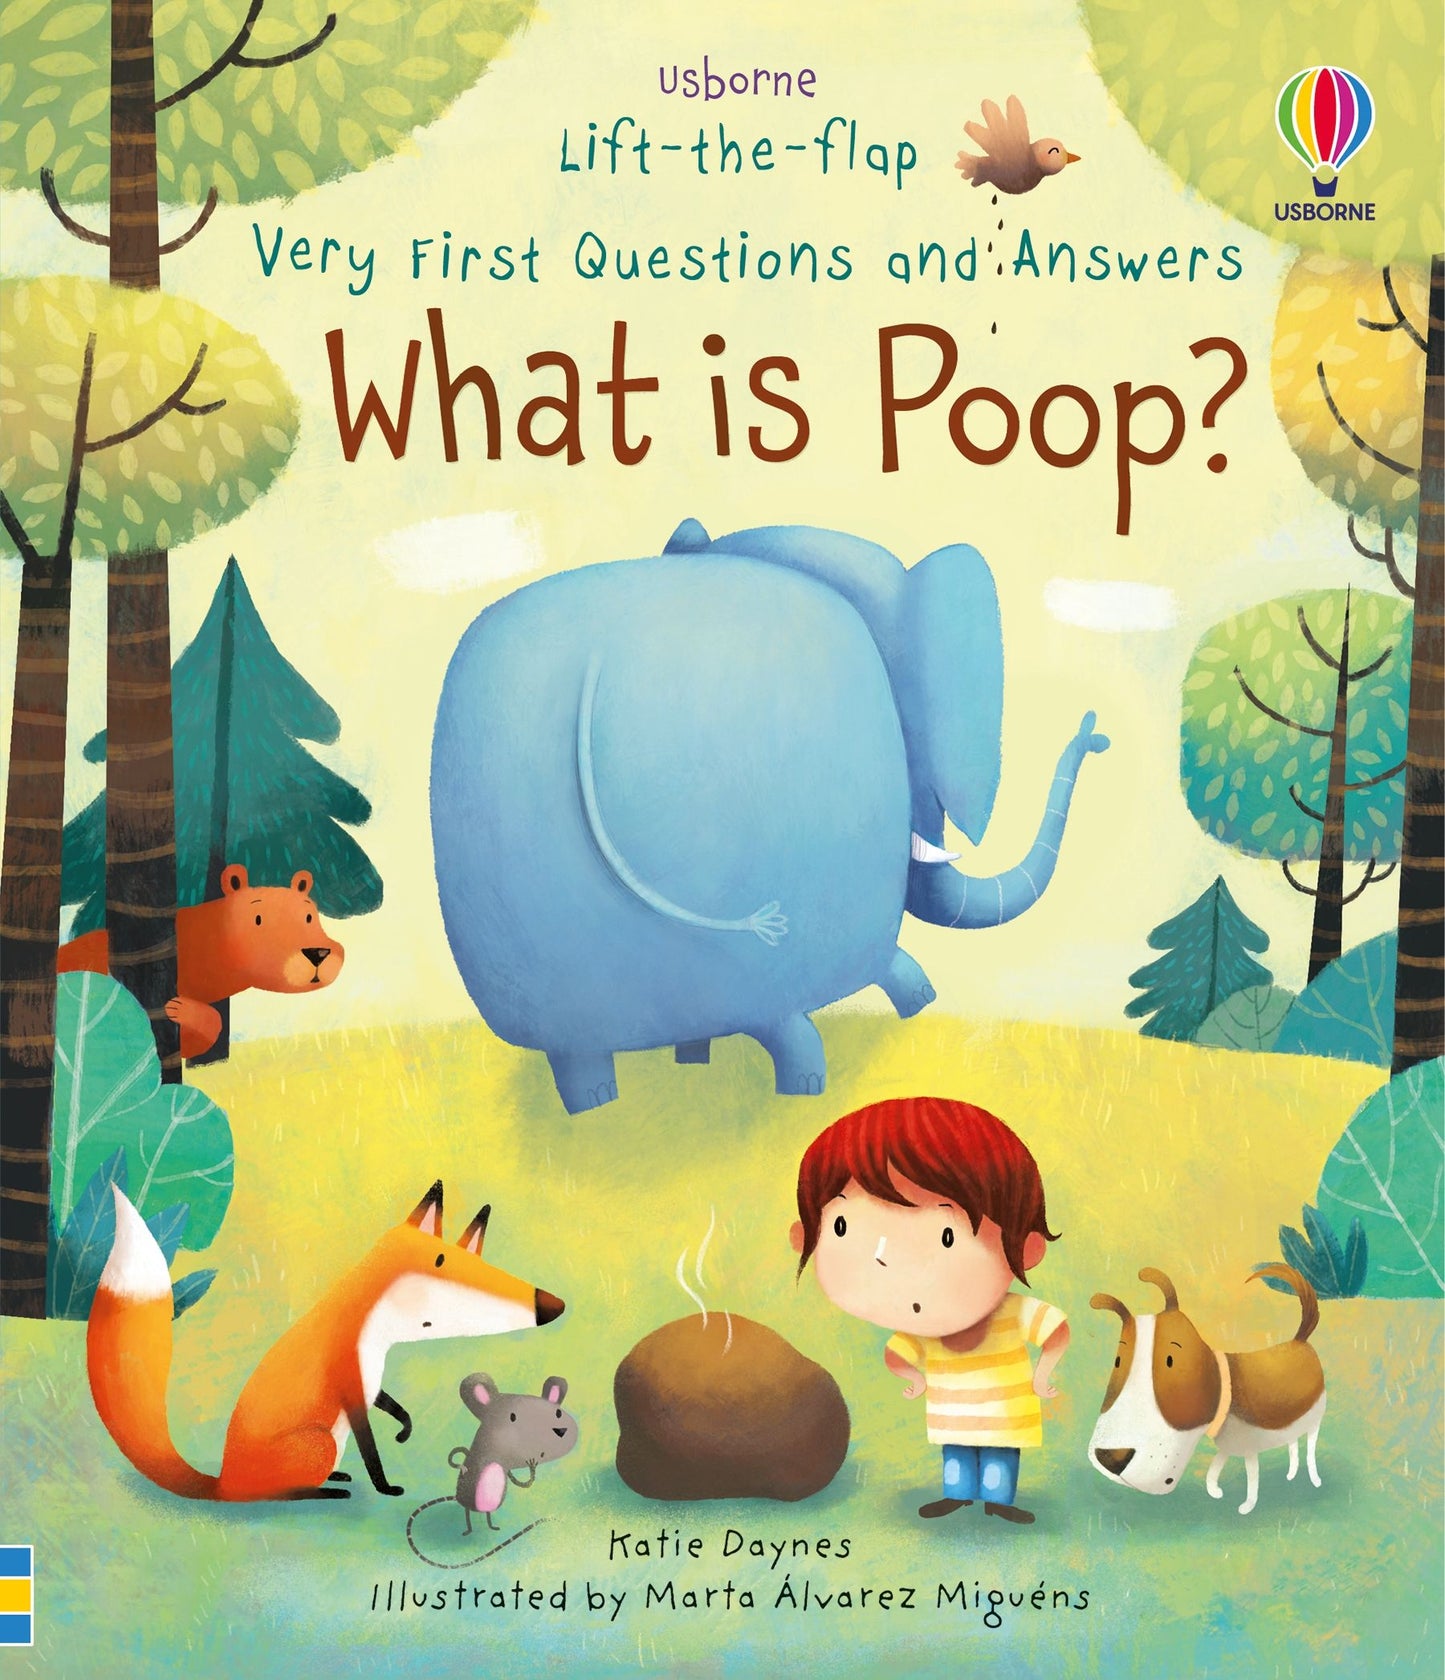 Very First Questions and Answers: What is Poop?